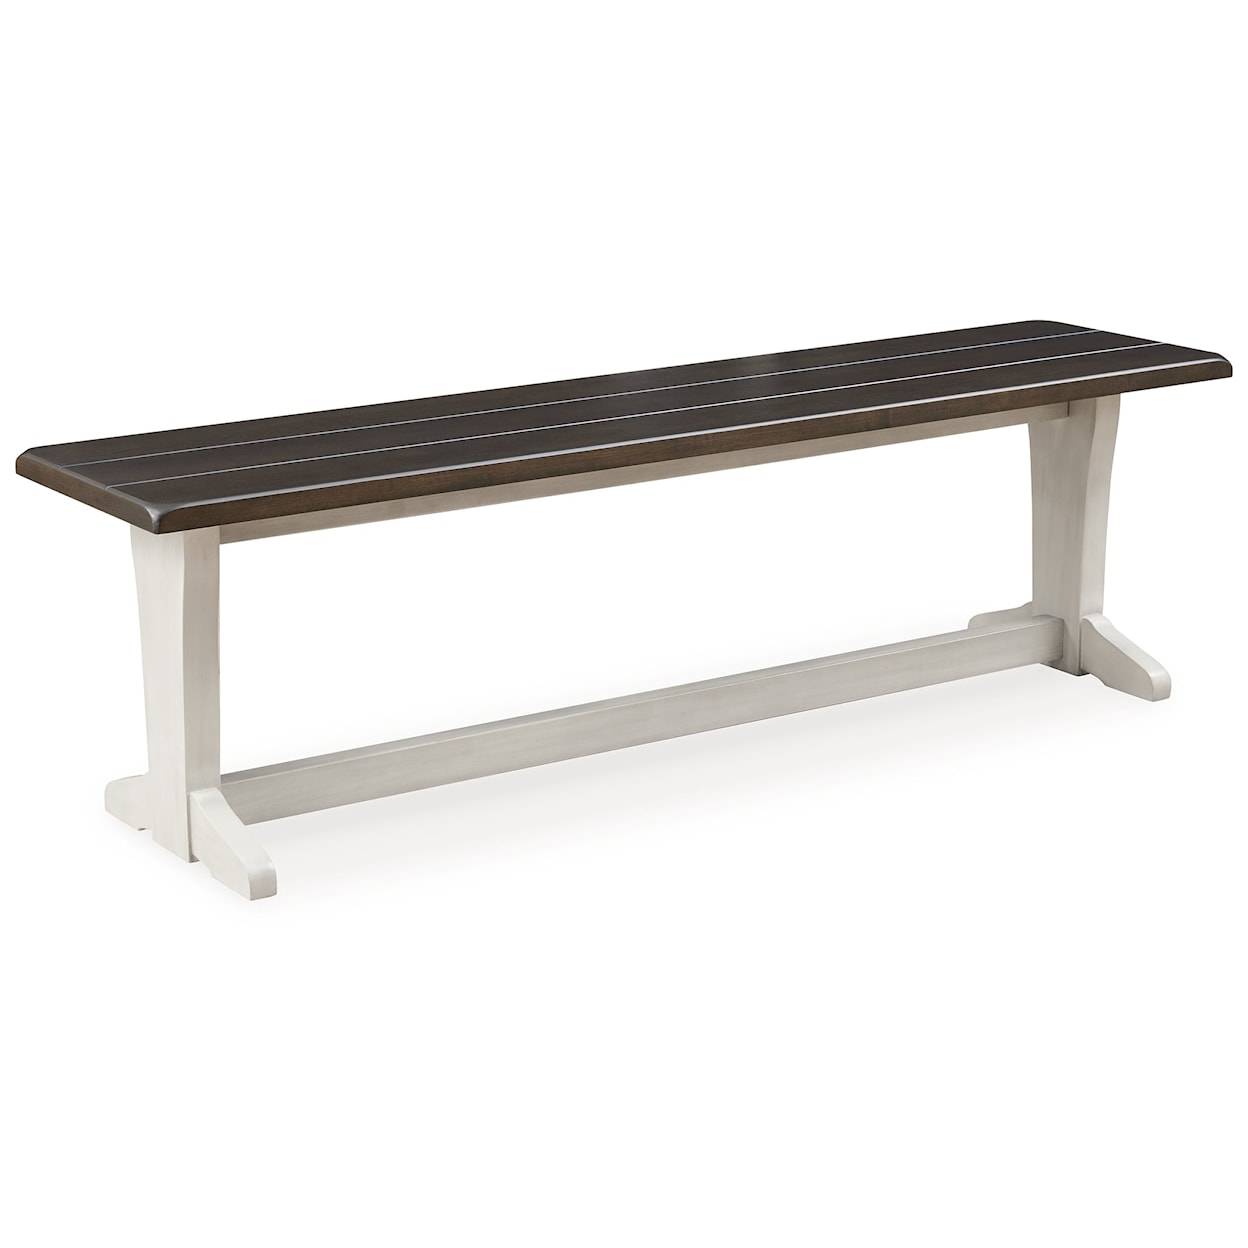 Signature Design by Ashley Furniture Darborn Large Dining Room Bench